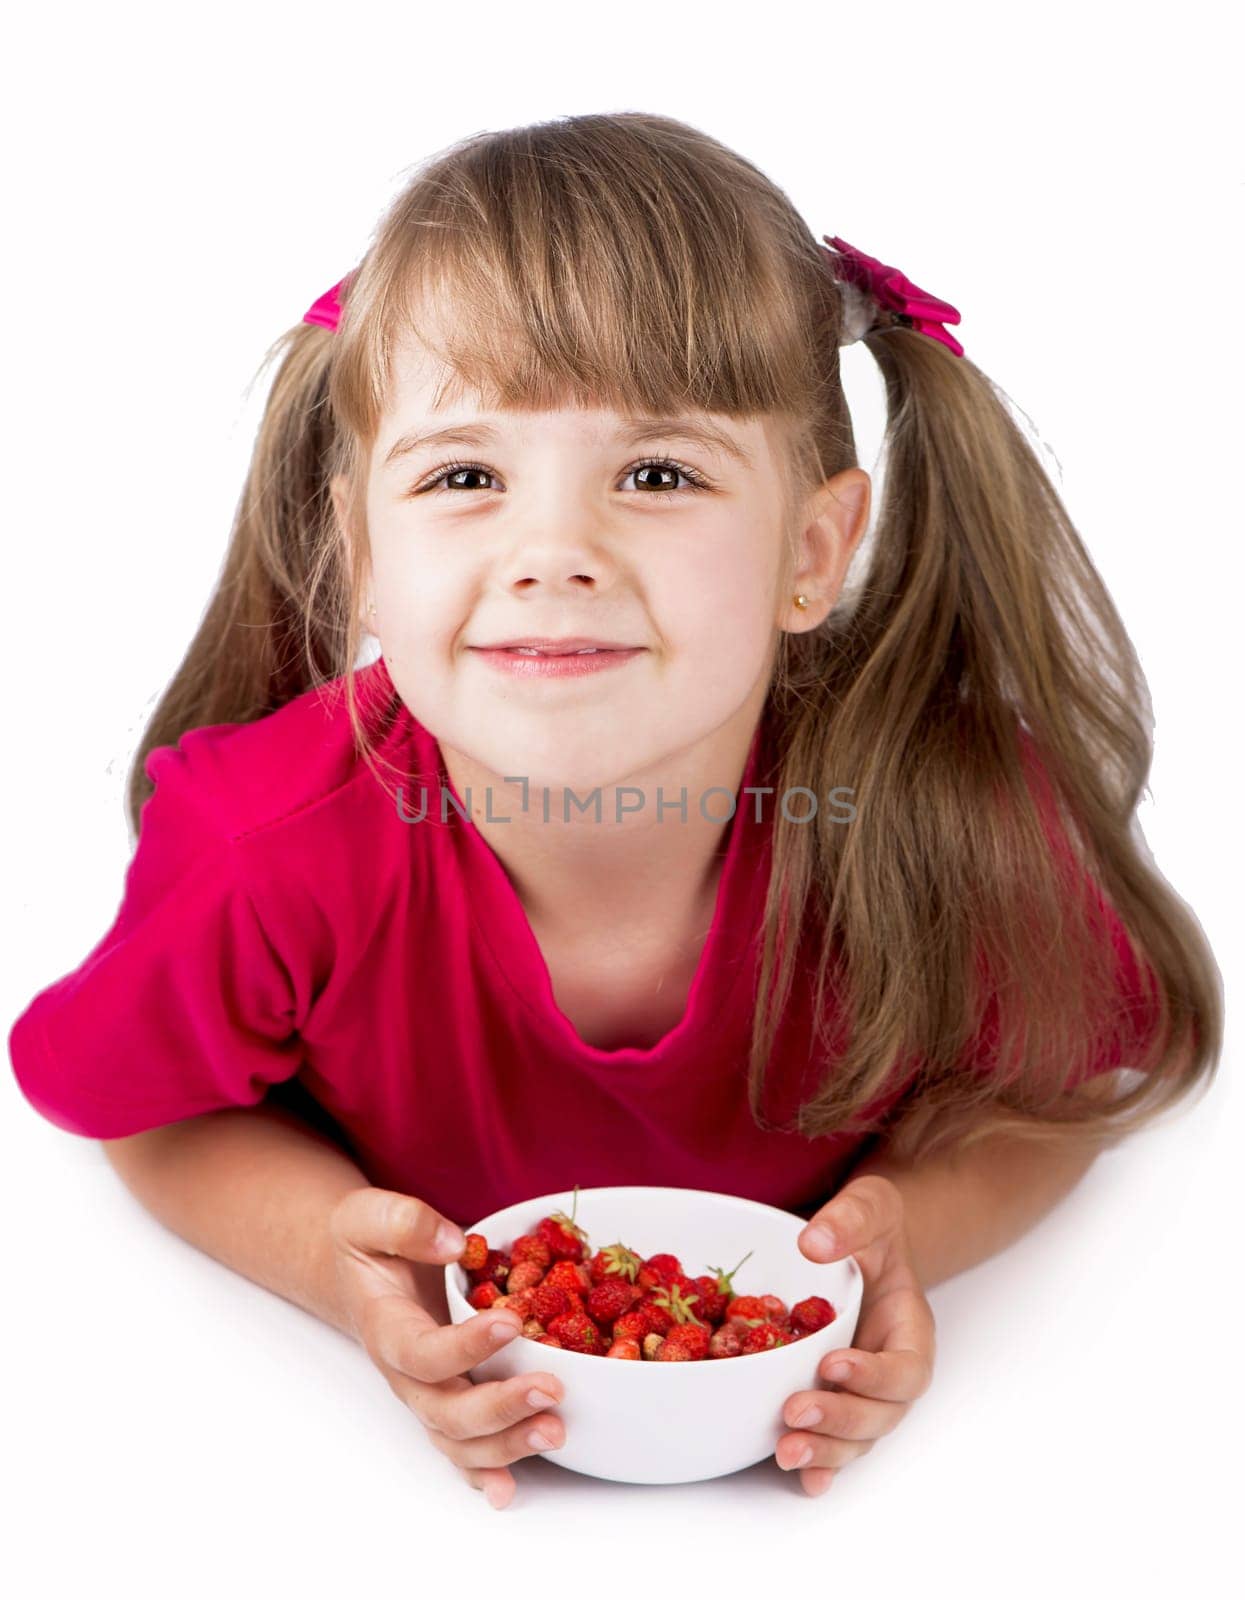 Portrait of a cheerful little girl in a pink t-shirt holding a white bowl of strawberries on a white background by aprilphoto